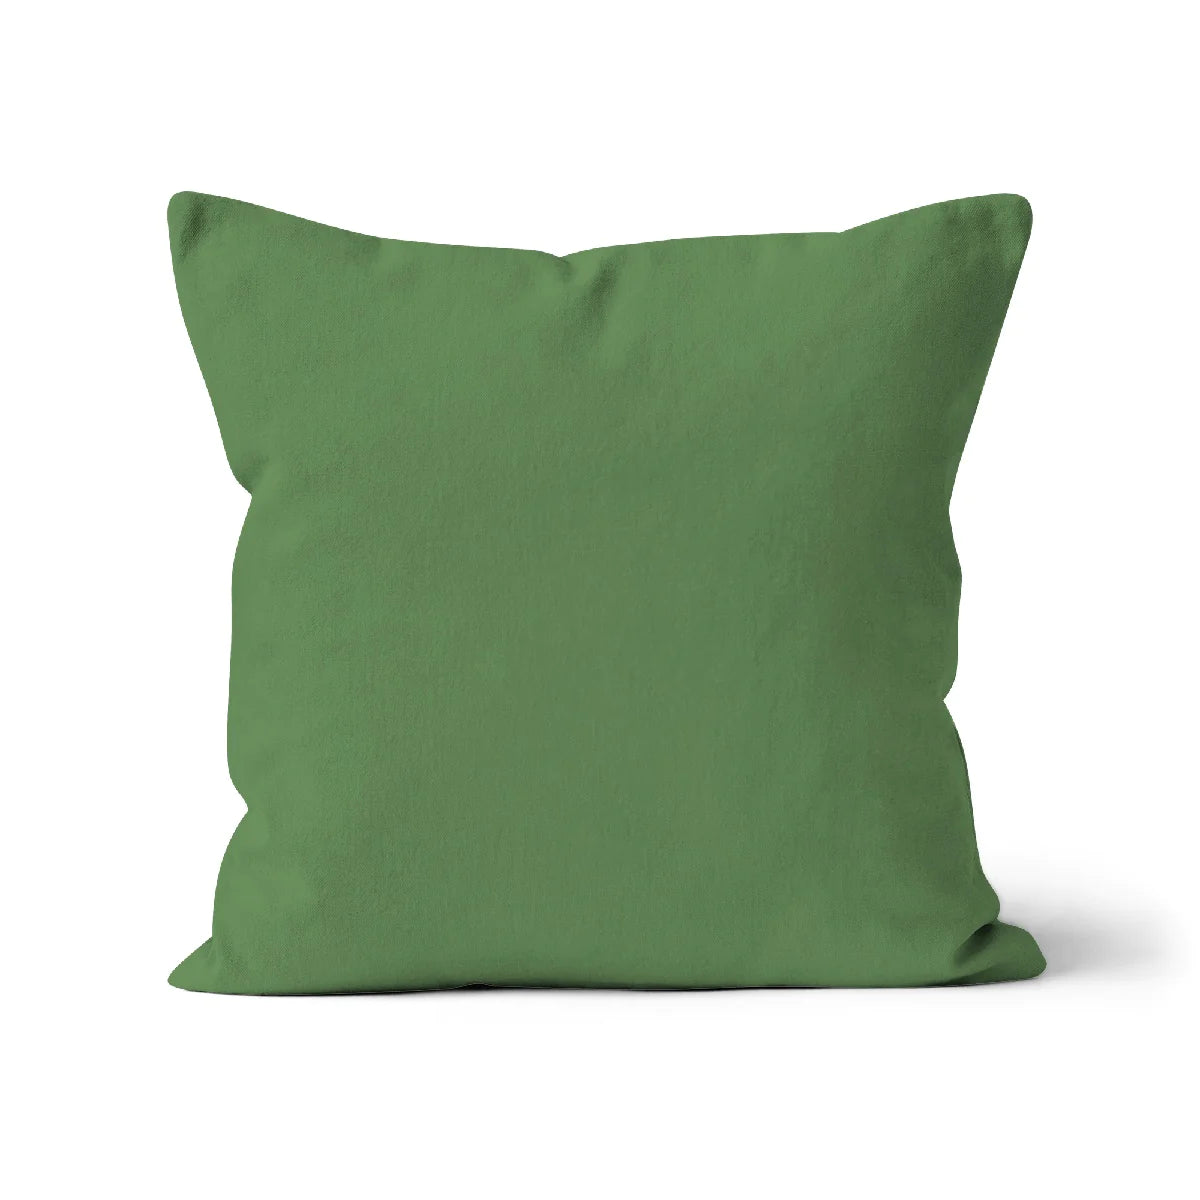 Woodland green colour square cotton cushion cover. Sustainably made in UK. Eco-friendly inks. Woodland Green Cushion Cover, Earthy Forest-Hued Pillow Case, Nature-Inspired Decorative Cushion, Rustic Sofa Pillow Cover, Tranquil Scatter Cushion Protector, Woodland Green Pillowcase, Natural Home Decor, Cozy Woodland Green Living Room Pillow, Rustic-Themed Bedroom Cushion Cover, Forest Decor for Couch, Nature-Inspired Decorative Pillowcase, 